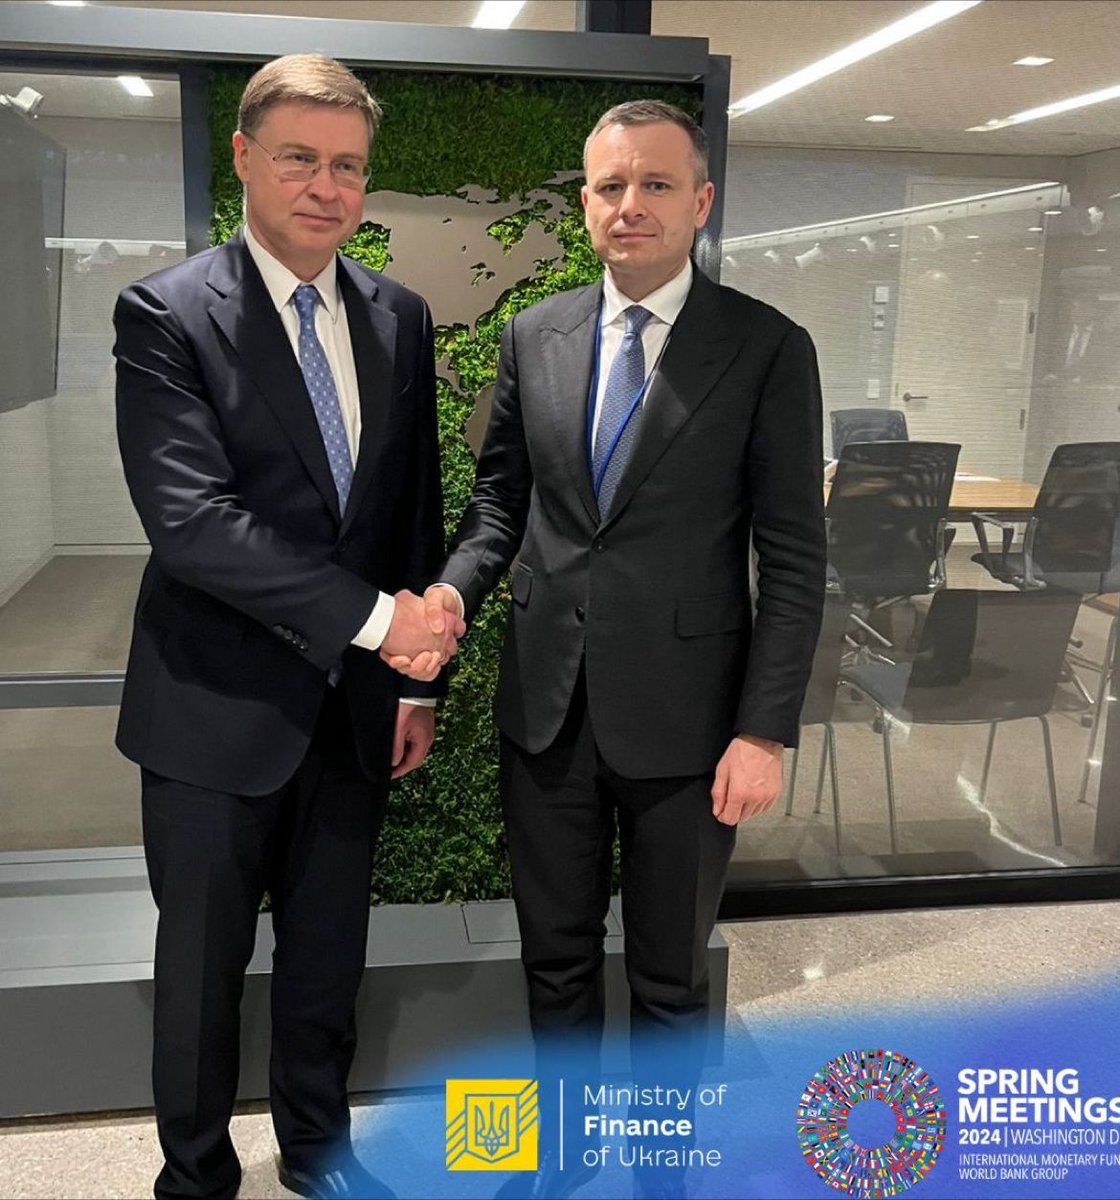 I am very glad to meet the real friend of🇺🇦Executive Vice President @VDombrovskis in DC. This year,🇪🇺remains a leader in supporting Ukraine. In March, the EU allocated €4.5 bn in funds for the needs of the state budget. Grateful for the impactful efforts in supporting Ukraine!